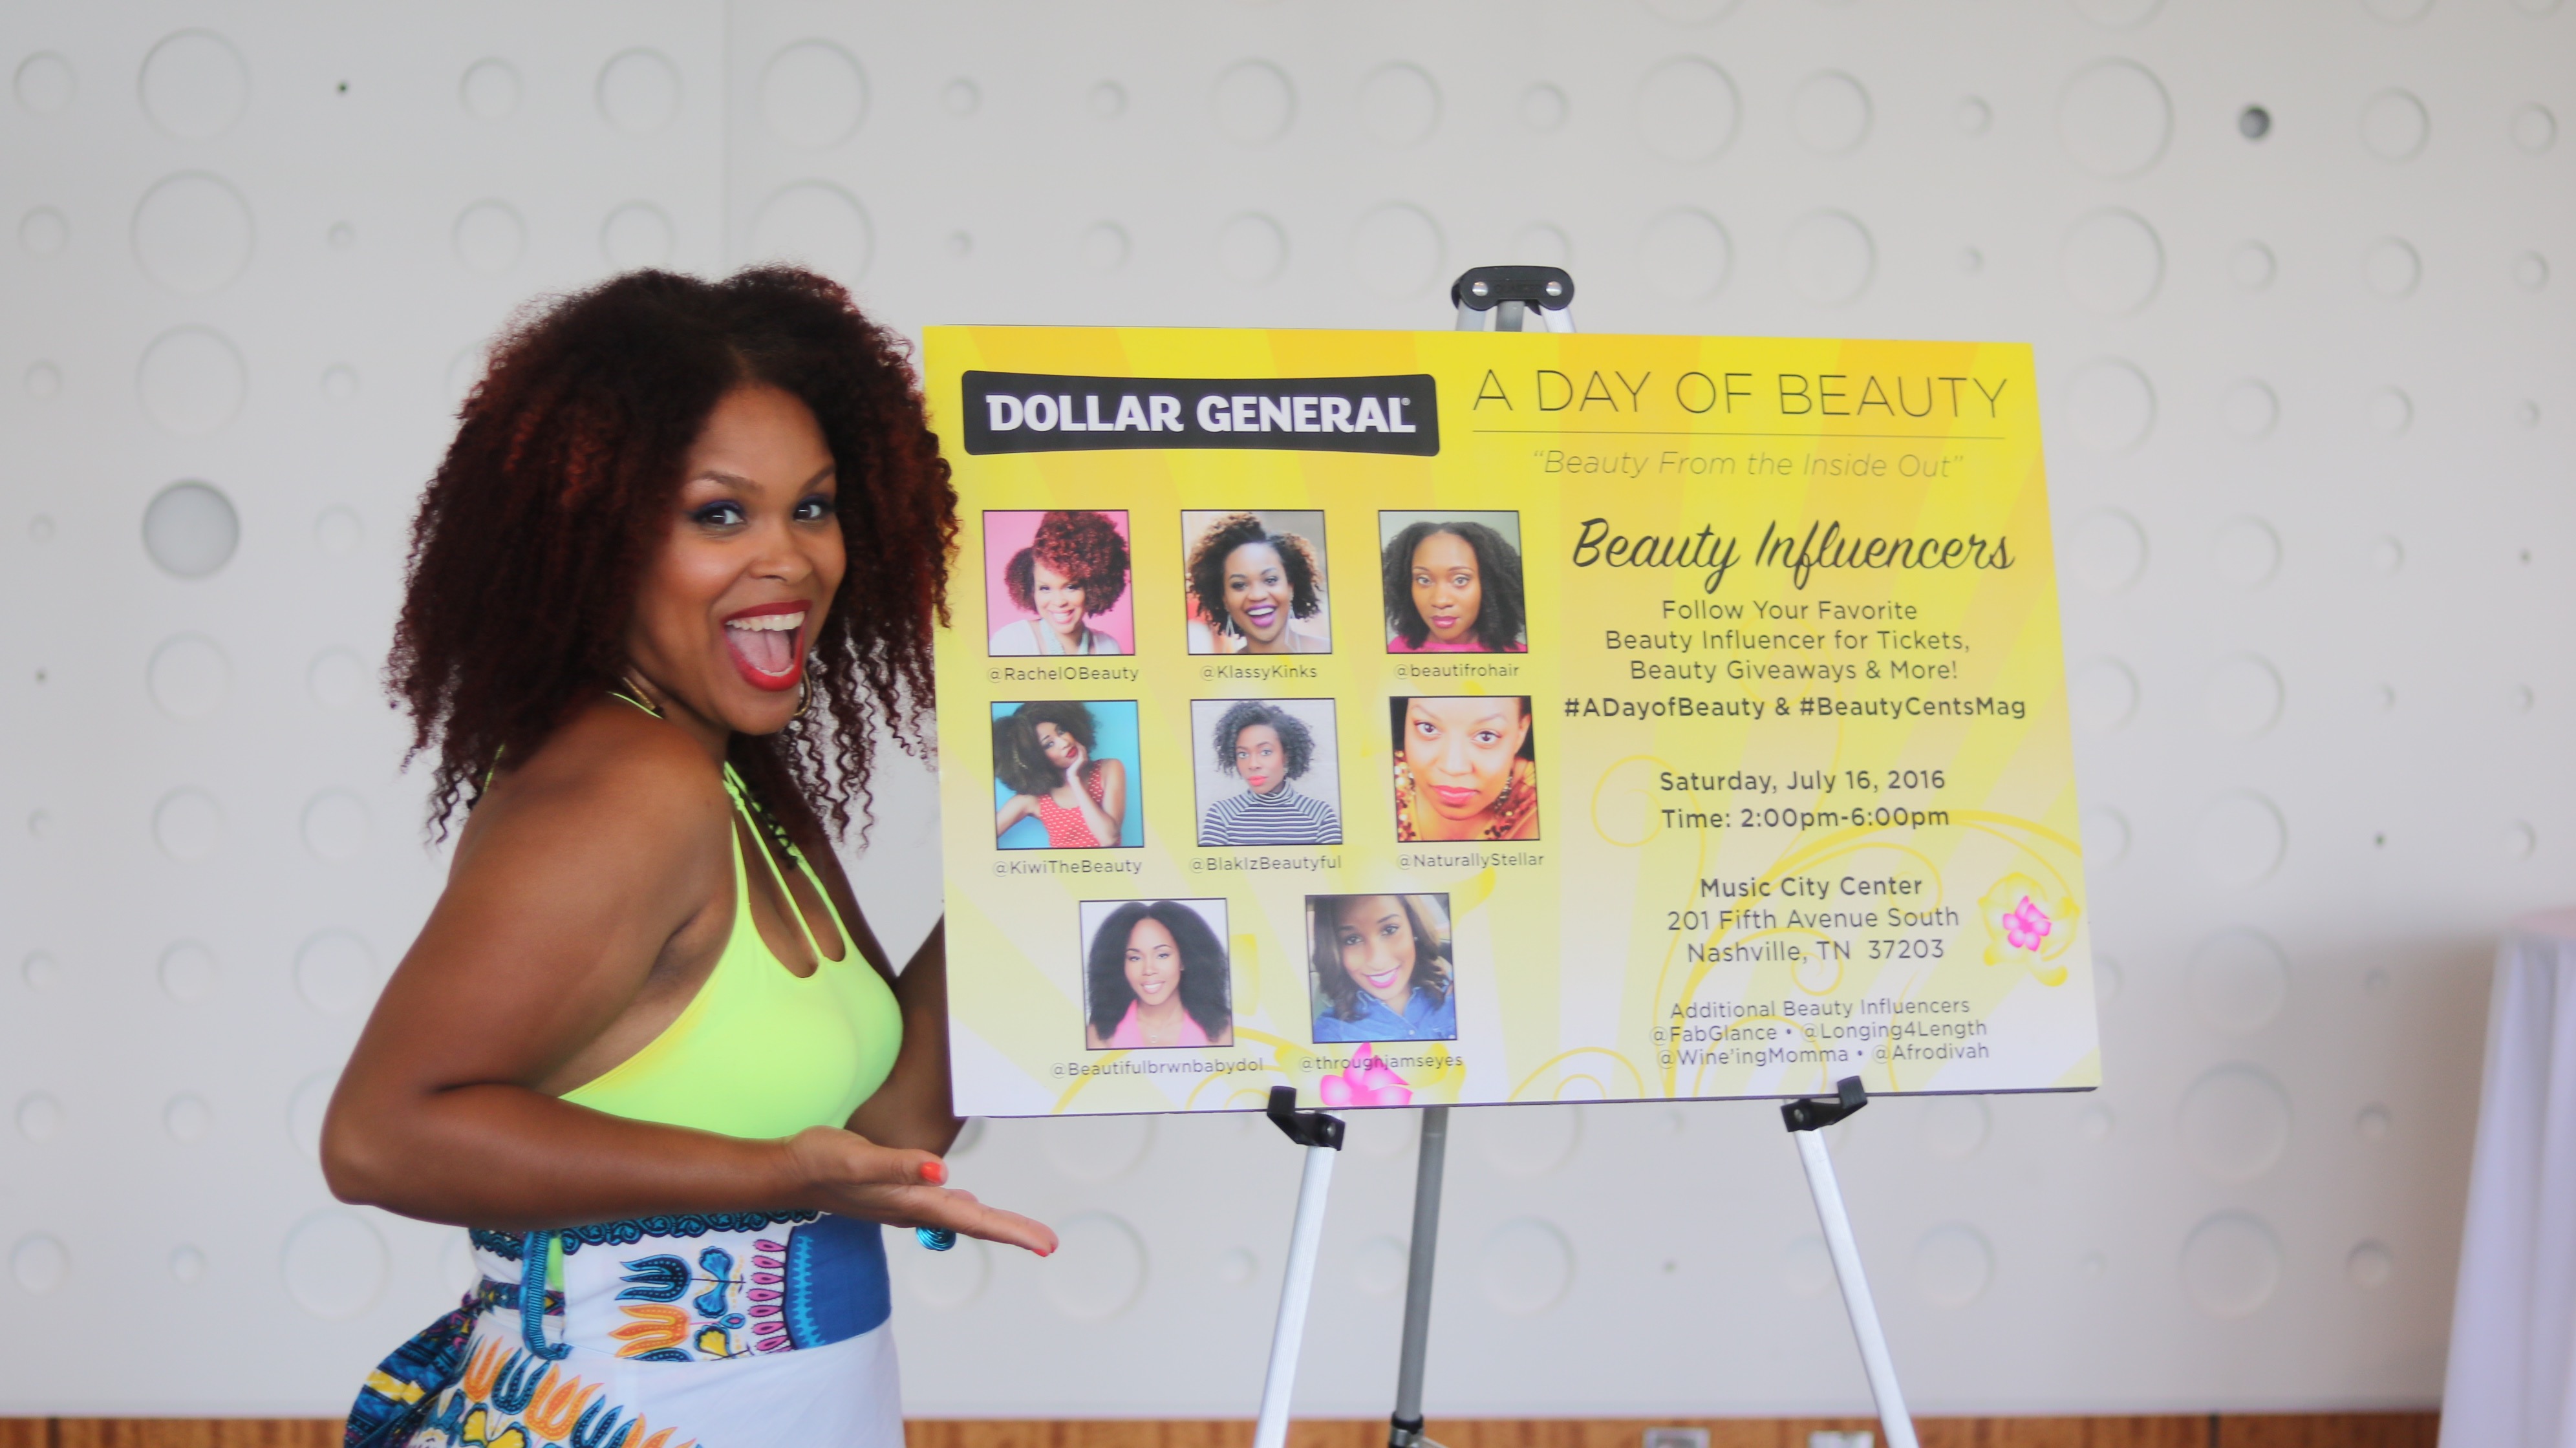 Inside Dollar General’s Day of Beauty Expo